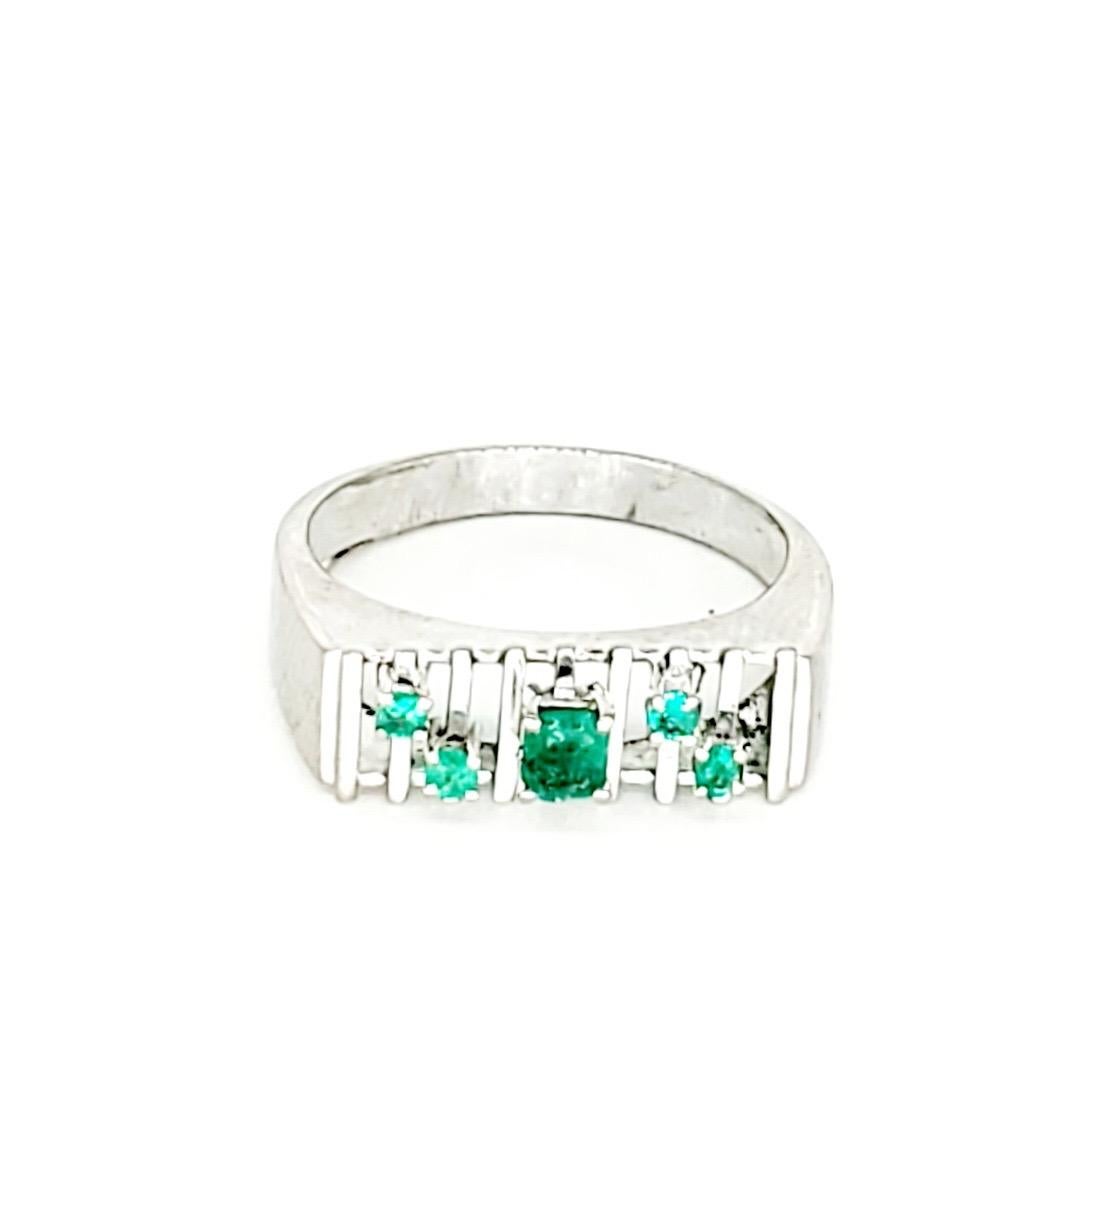 Art Deco Style 0.50 Carat Emerald Ring. The ring feature an Art Deco Style design consisting of 5 emeralds totalling approx 0.50 carats in weight . The ring is a size 7 and weights approx 3.6 grams 18k white gold.